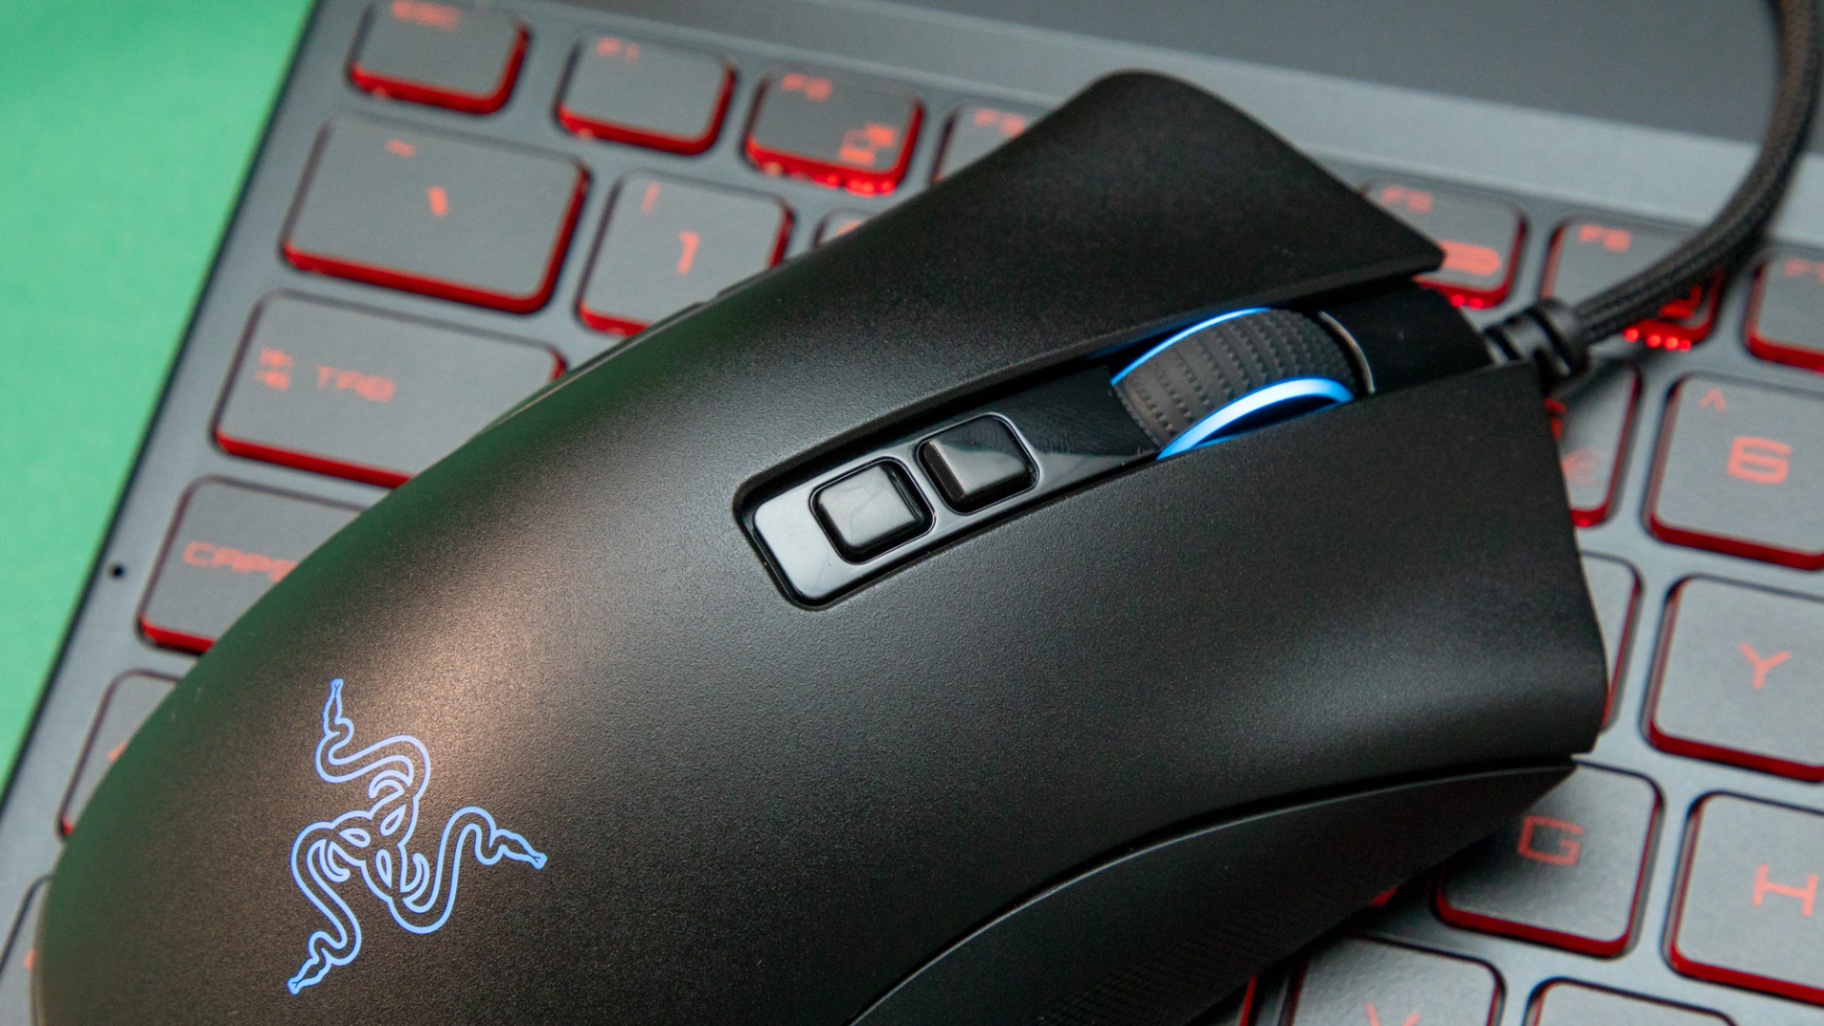 Compare The Best Mouses That Gamers Use To Play On PCs